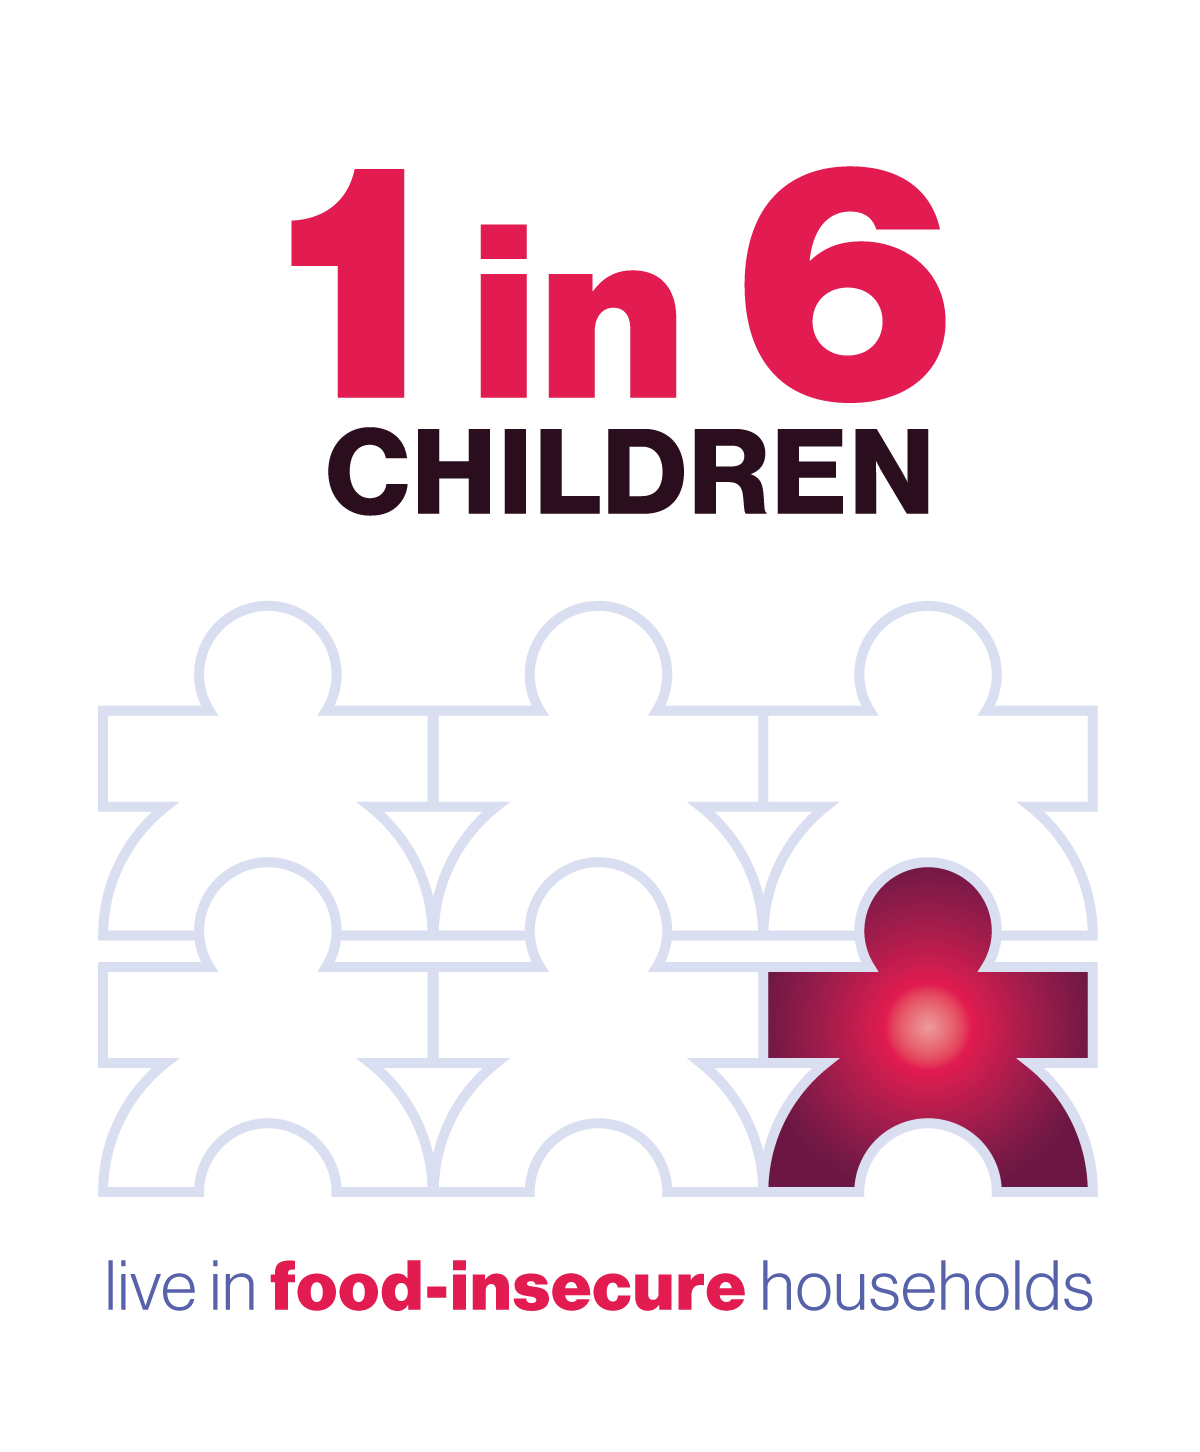 1 in 6 children live in a food insecure household.